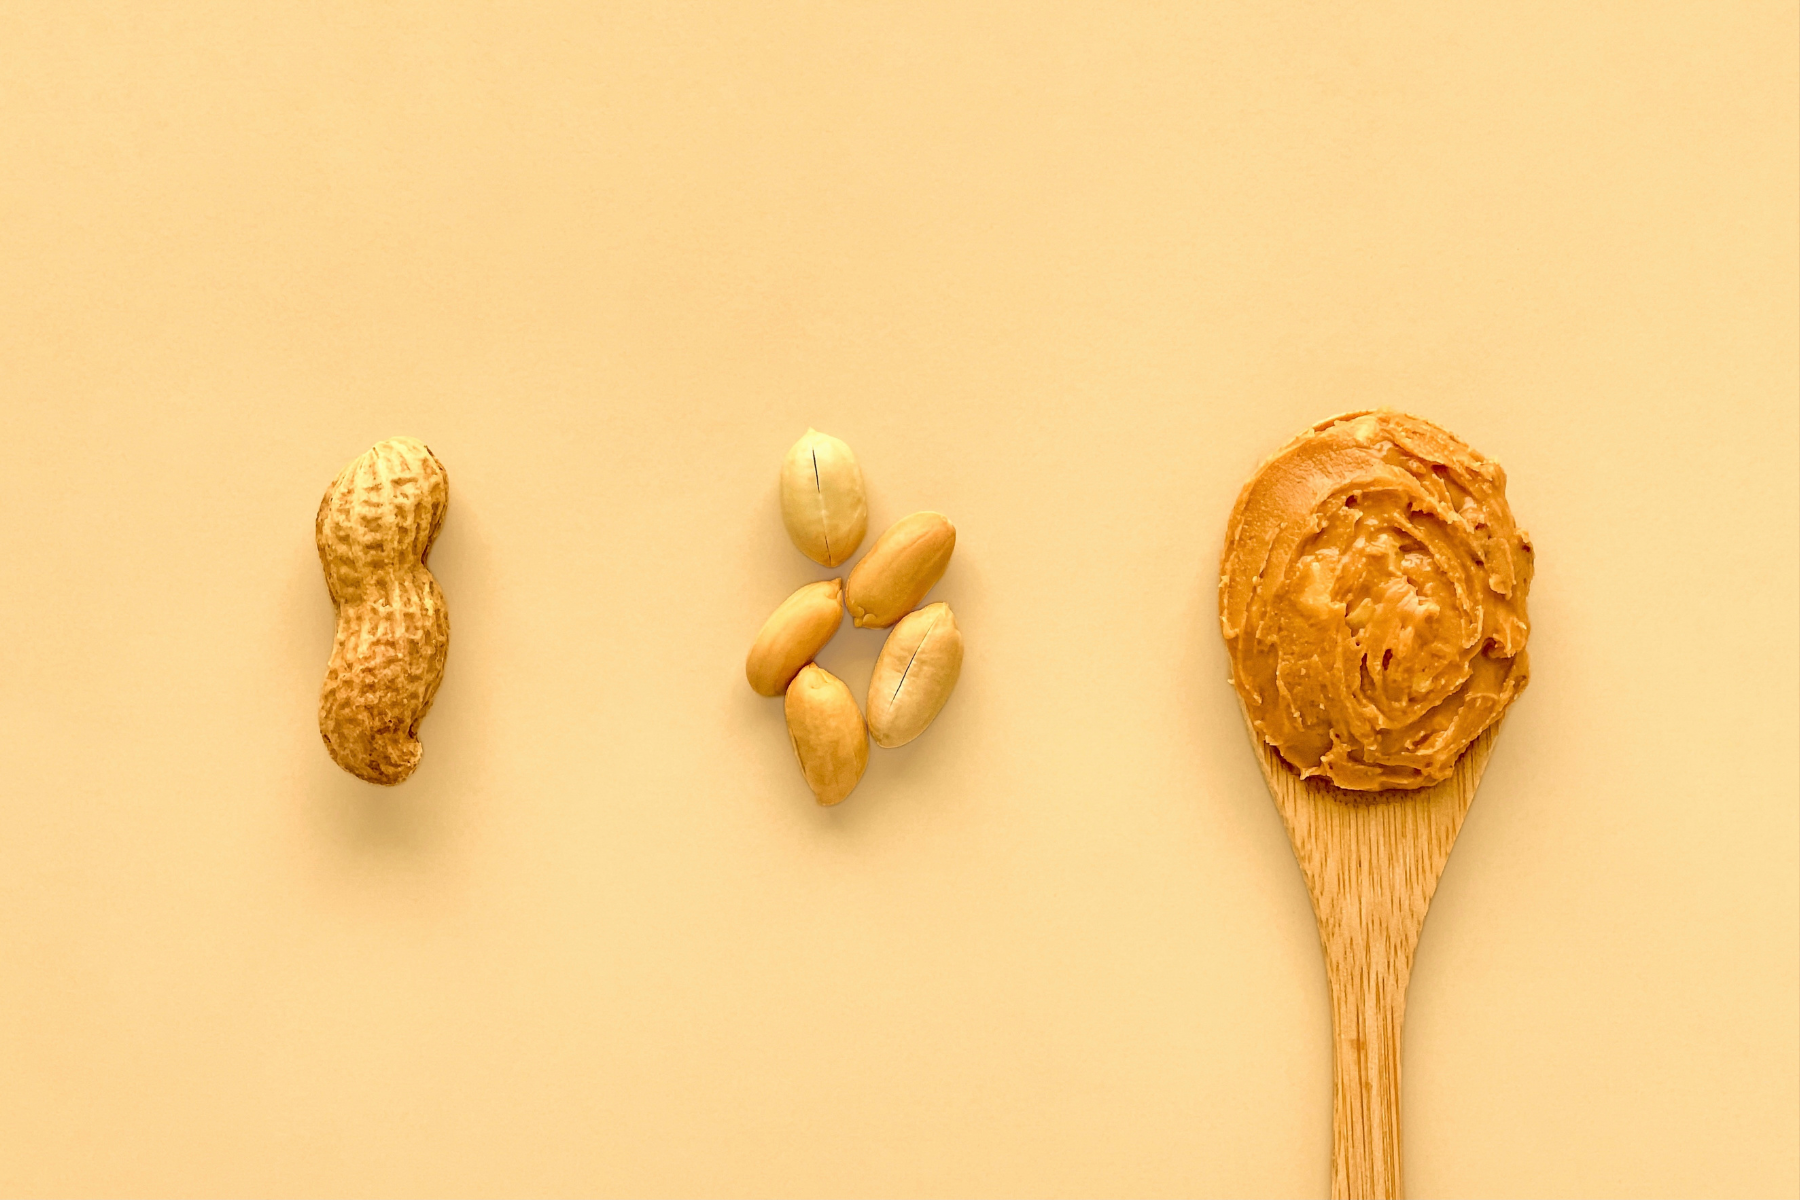 A close up of a wooden spoon of peanut butter next to two small bundle of peanuts, one shelled and the other unshelled.